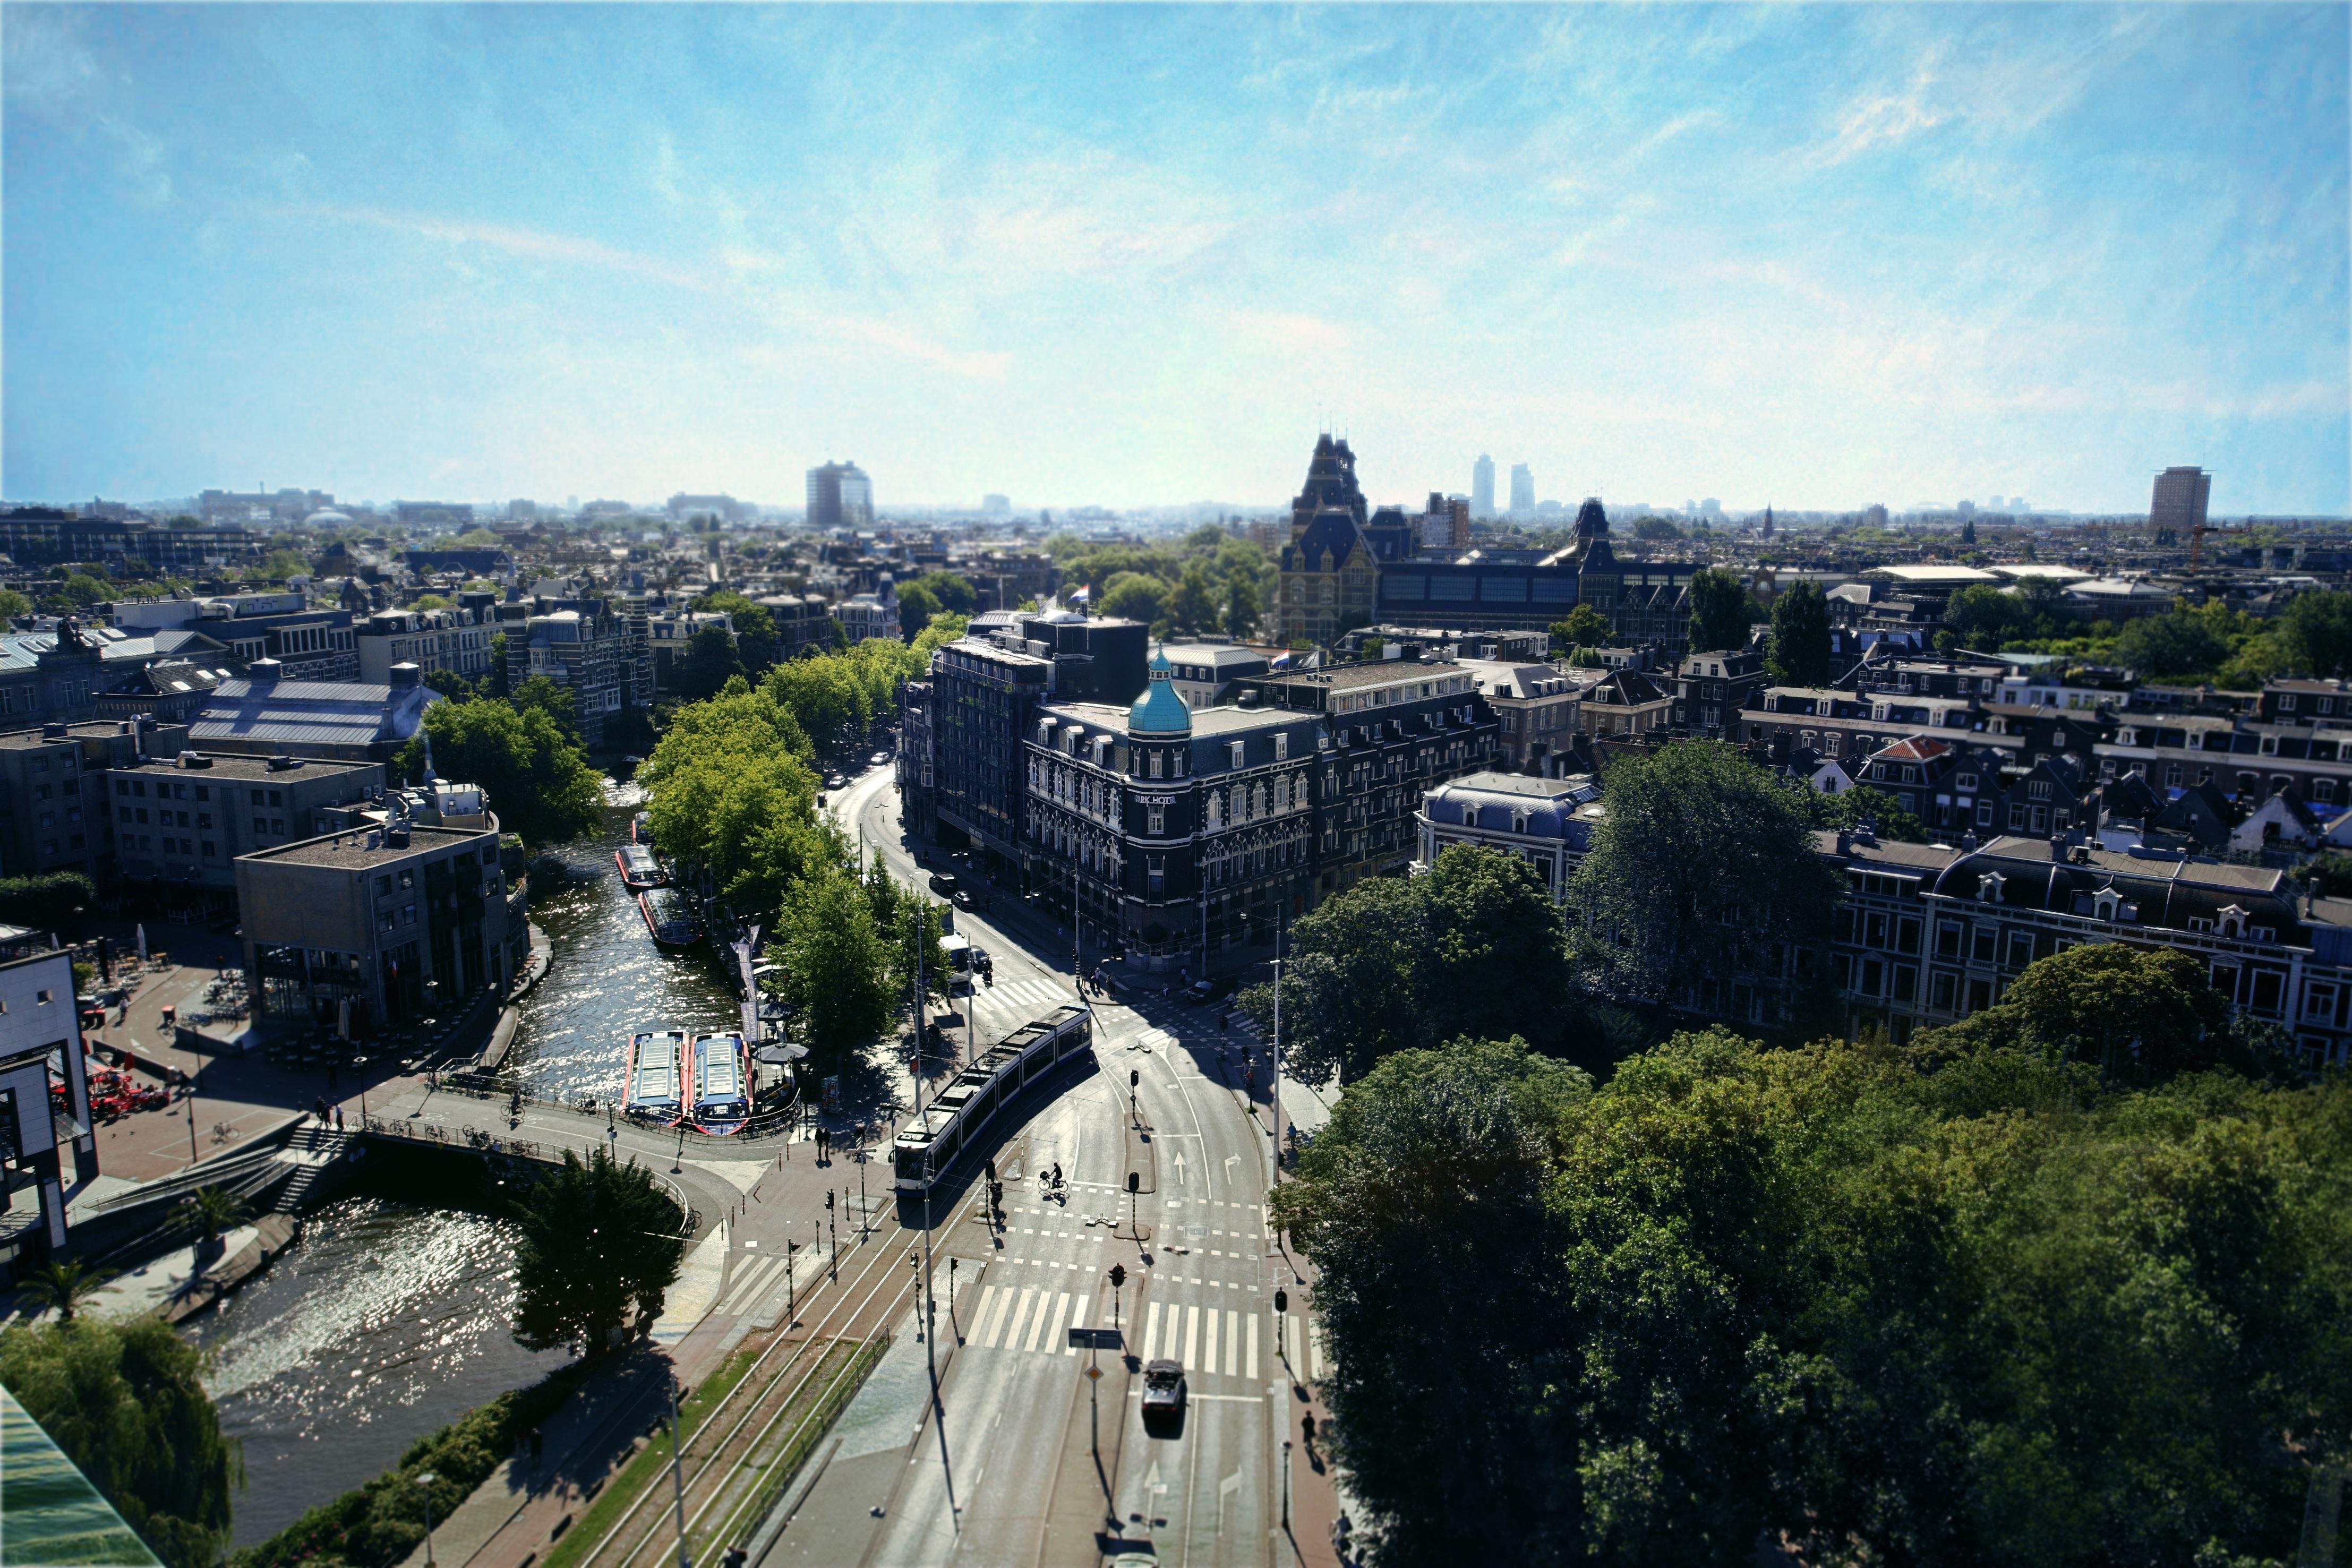 Park Centraal Amsterdam, Part Of Sircle Collection Exterior photo